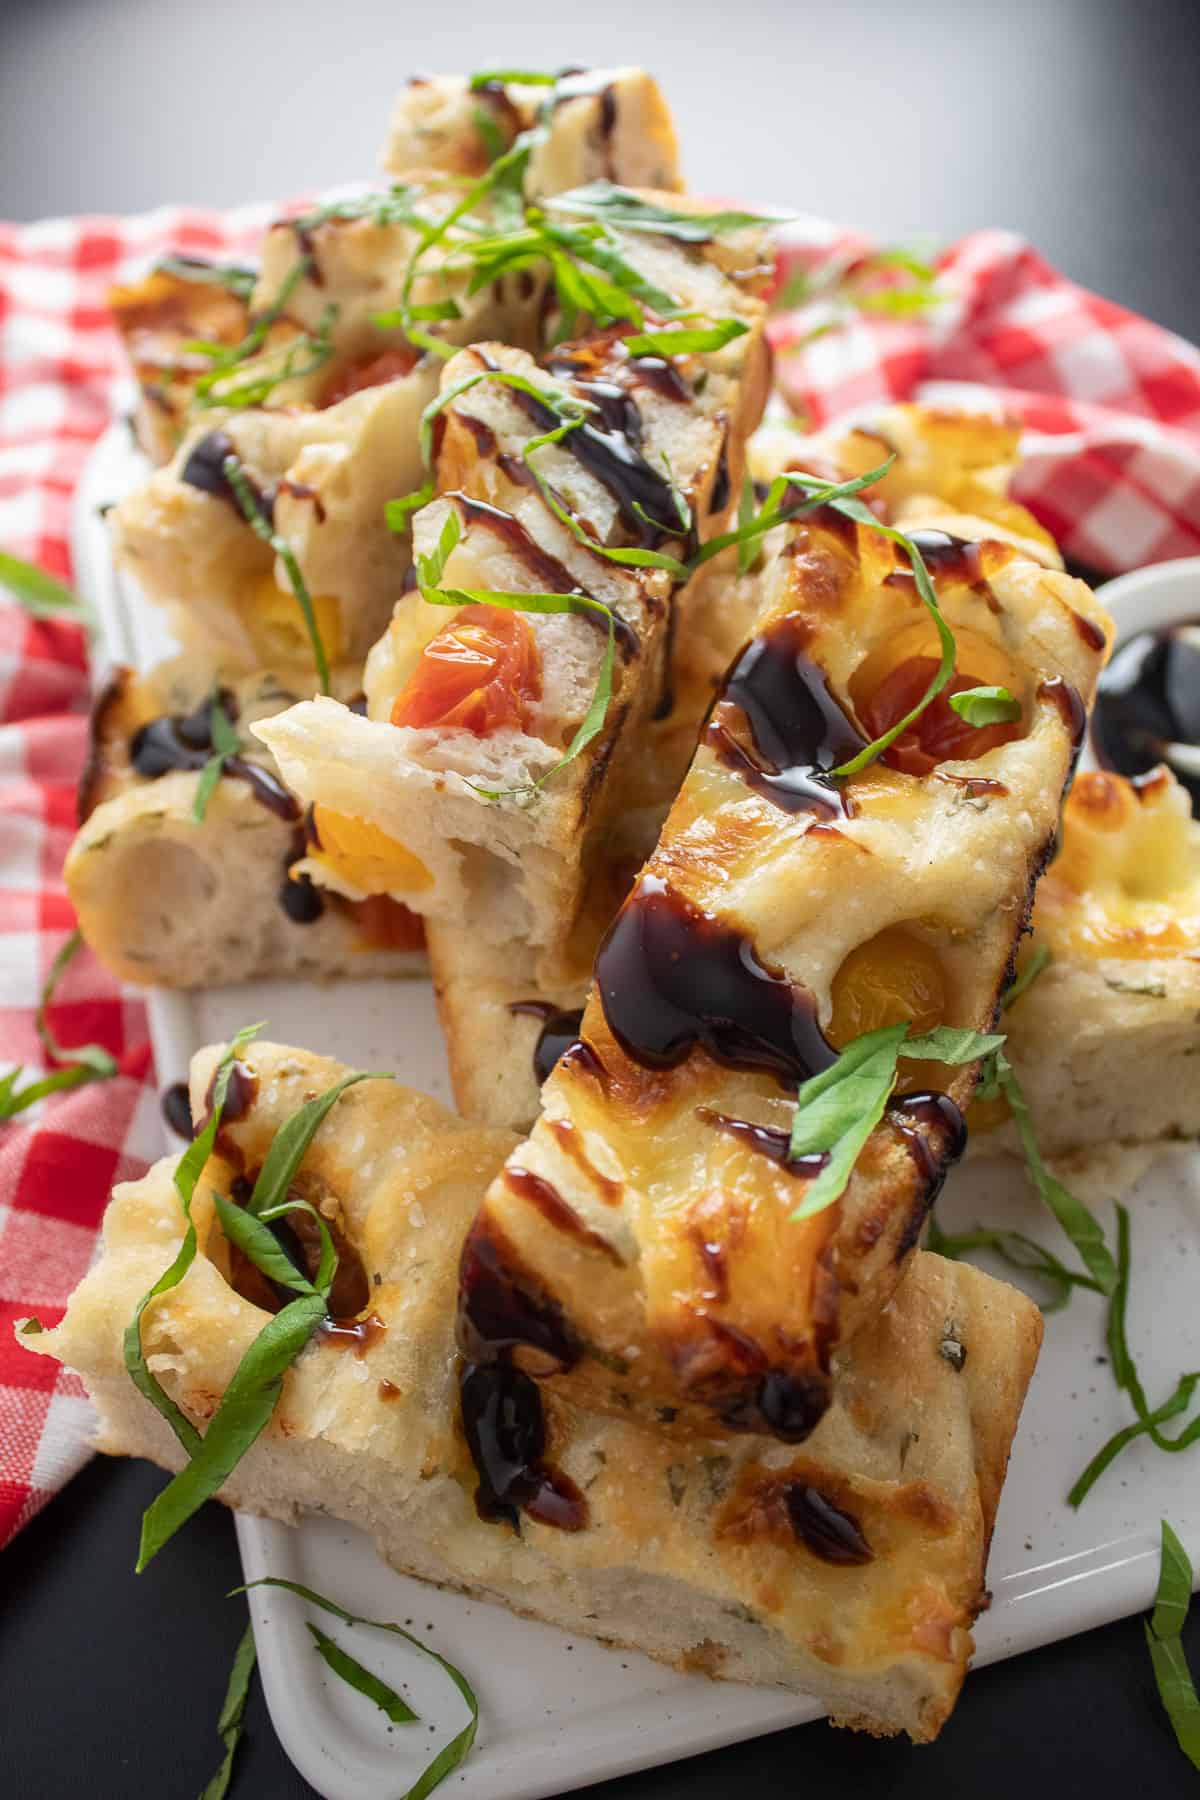 Slices of the focaccia stacked on a white tray and drizzled with balsamic glaze and shredded basil.